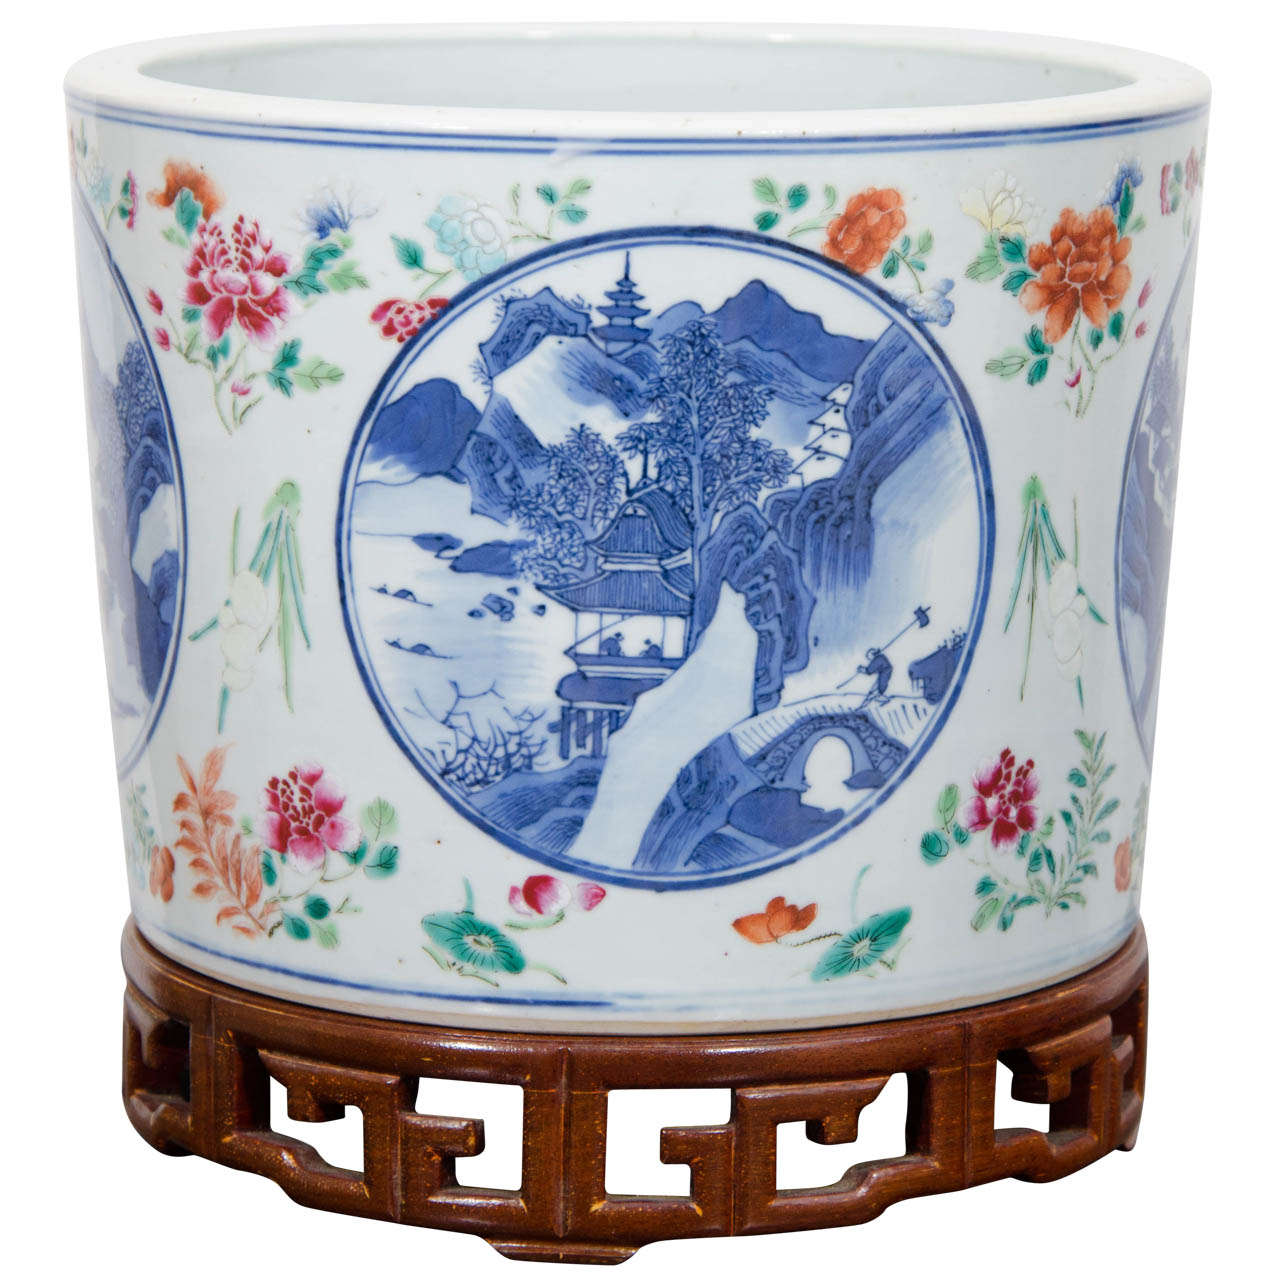 Large 19th Century Guangxu Period Chinese Porcelain Planter Depicting Four Noble Professions or Yuweng